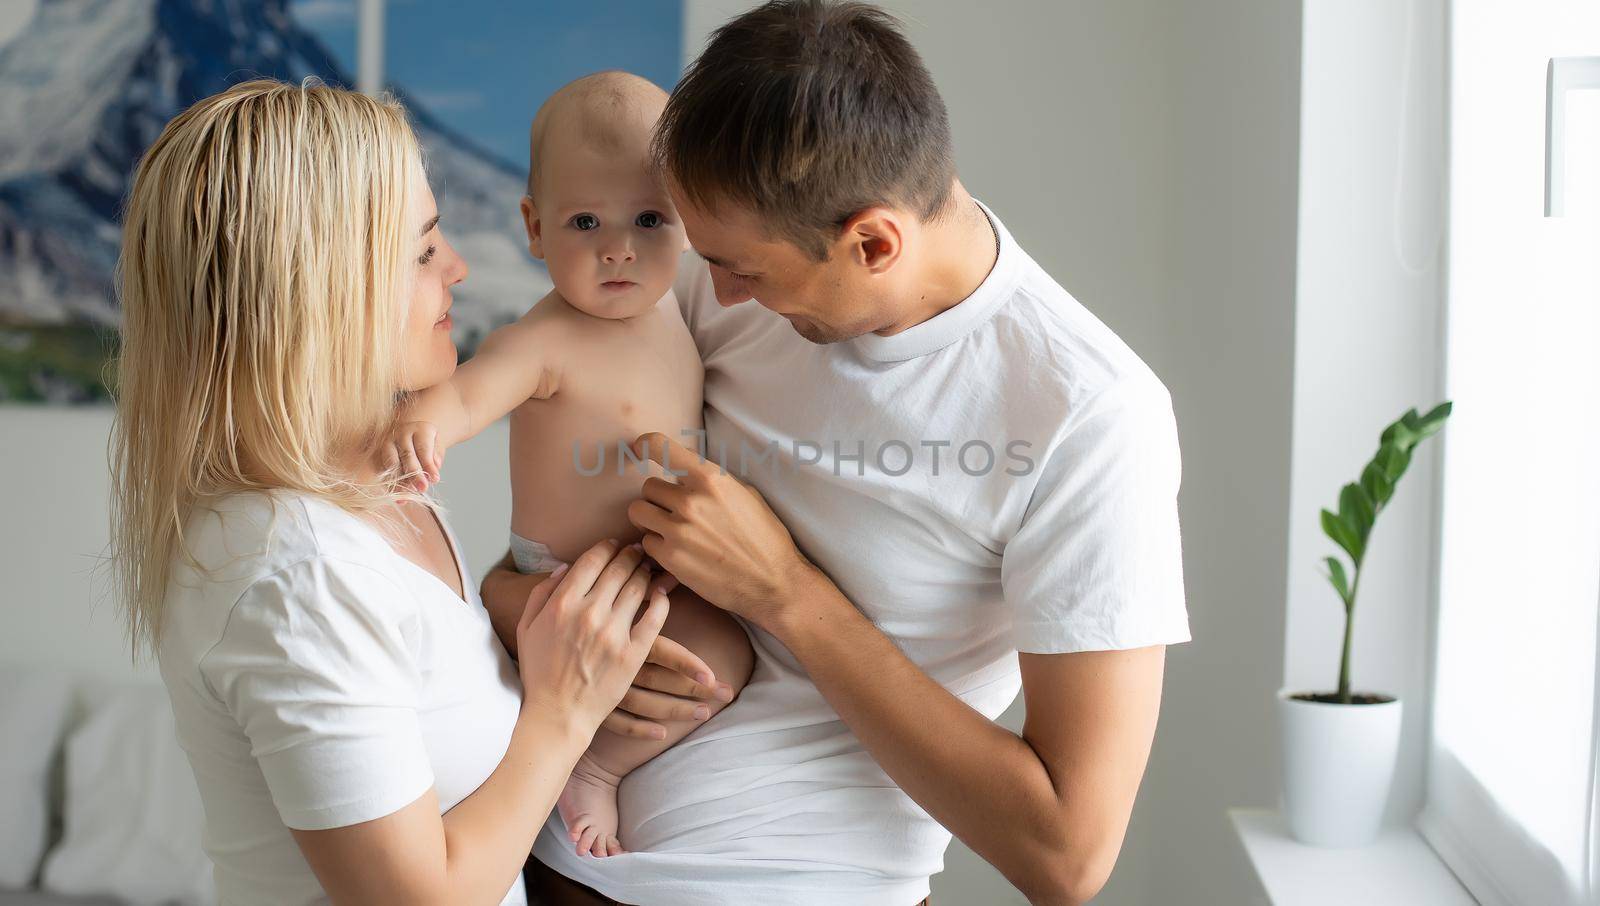 A Happy young family with baby in white bedroom by Andelov13